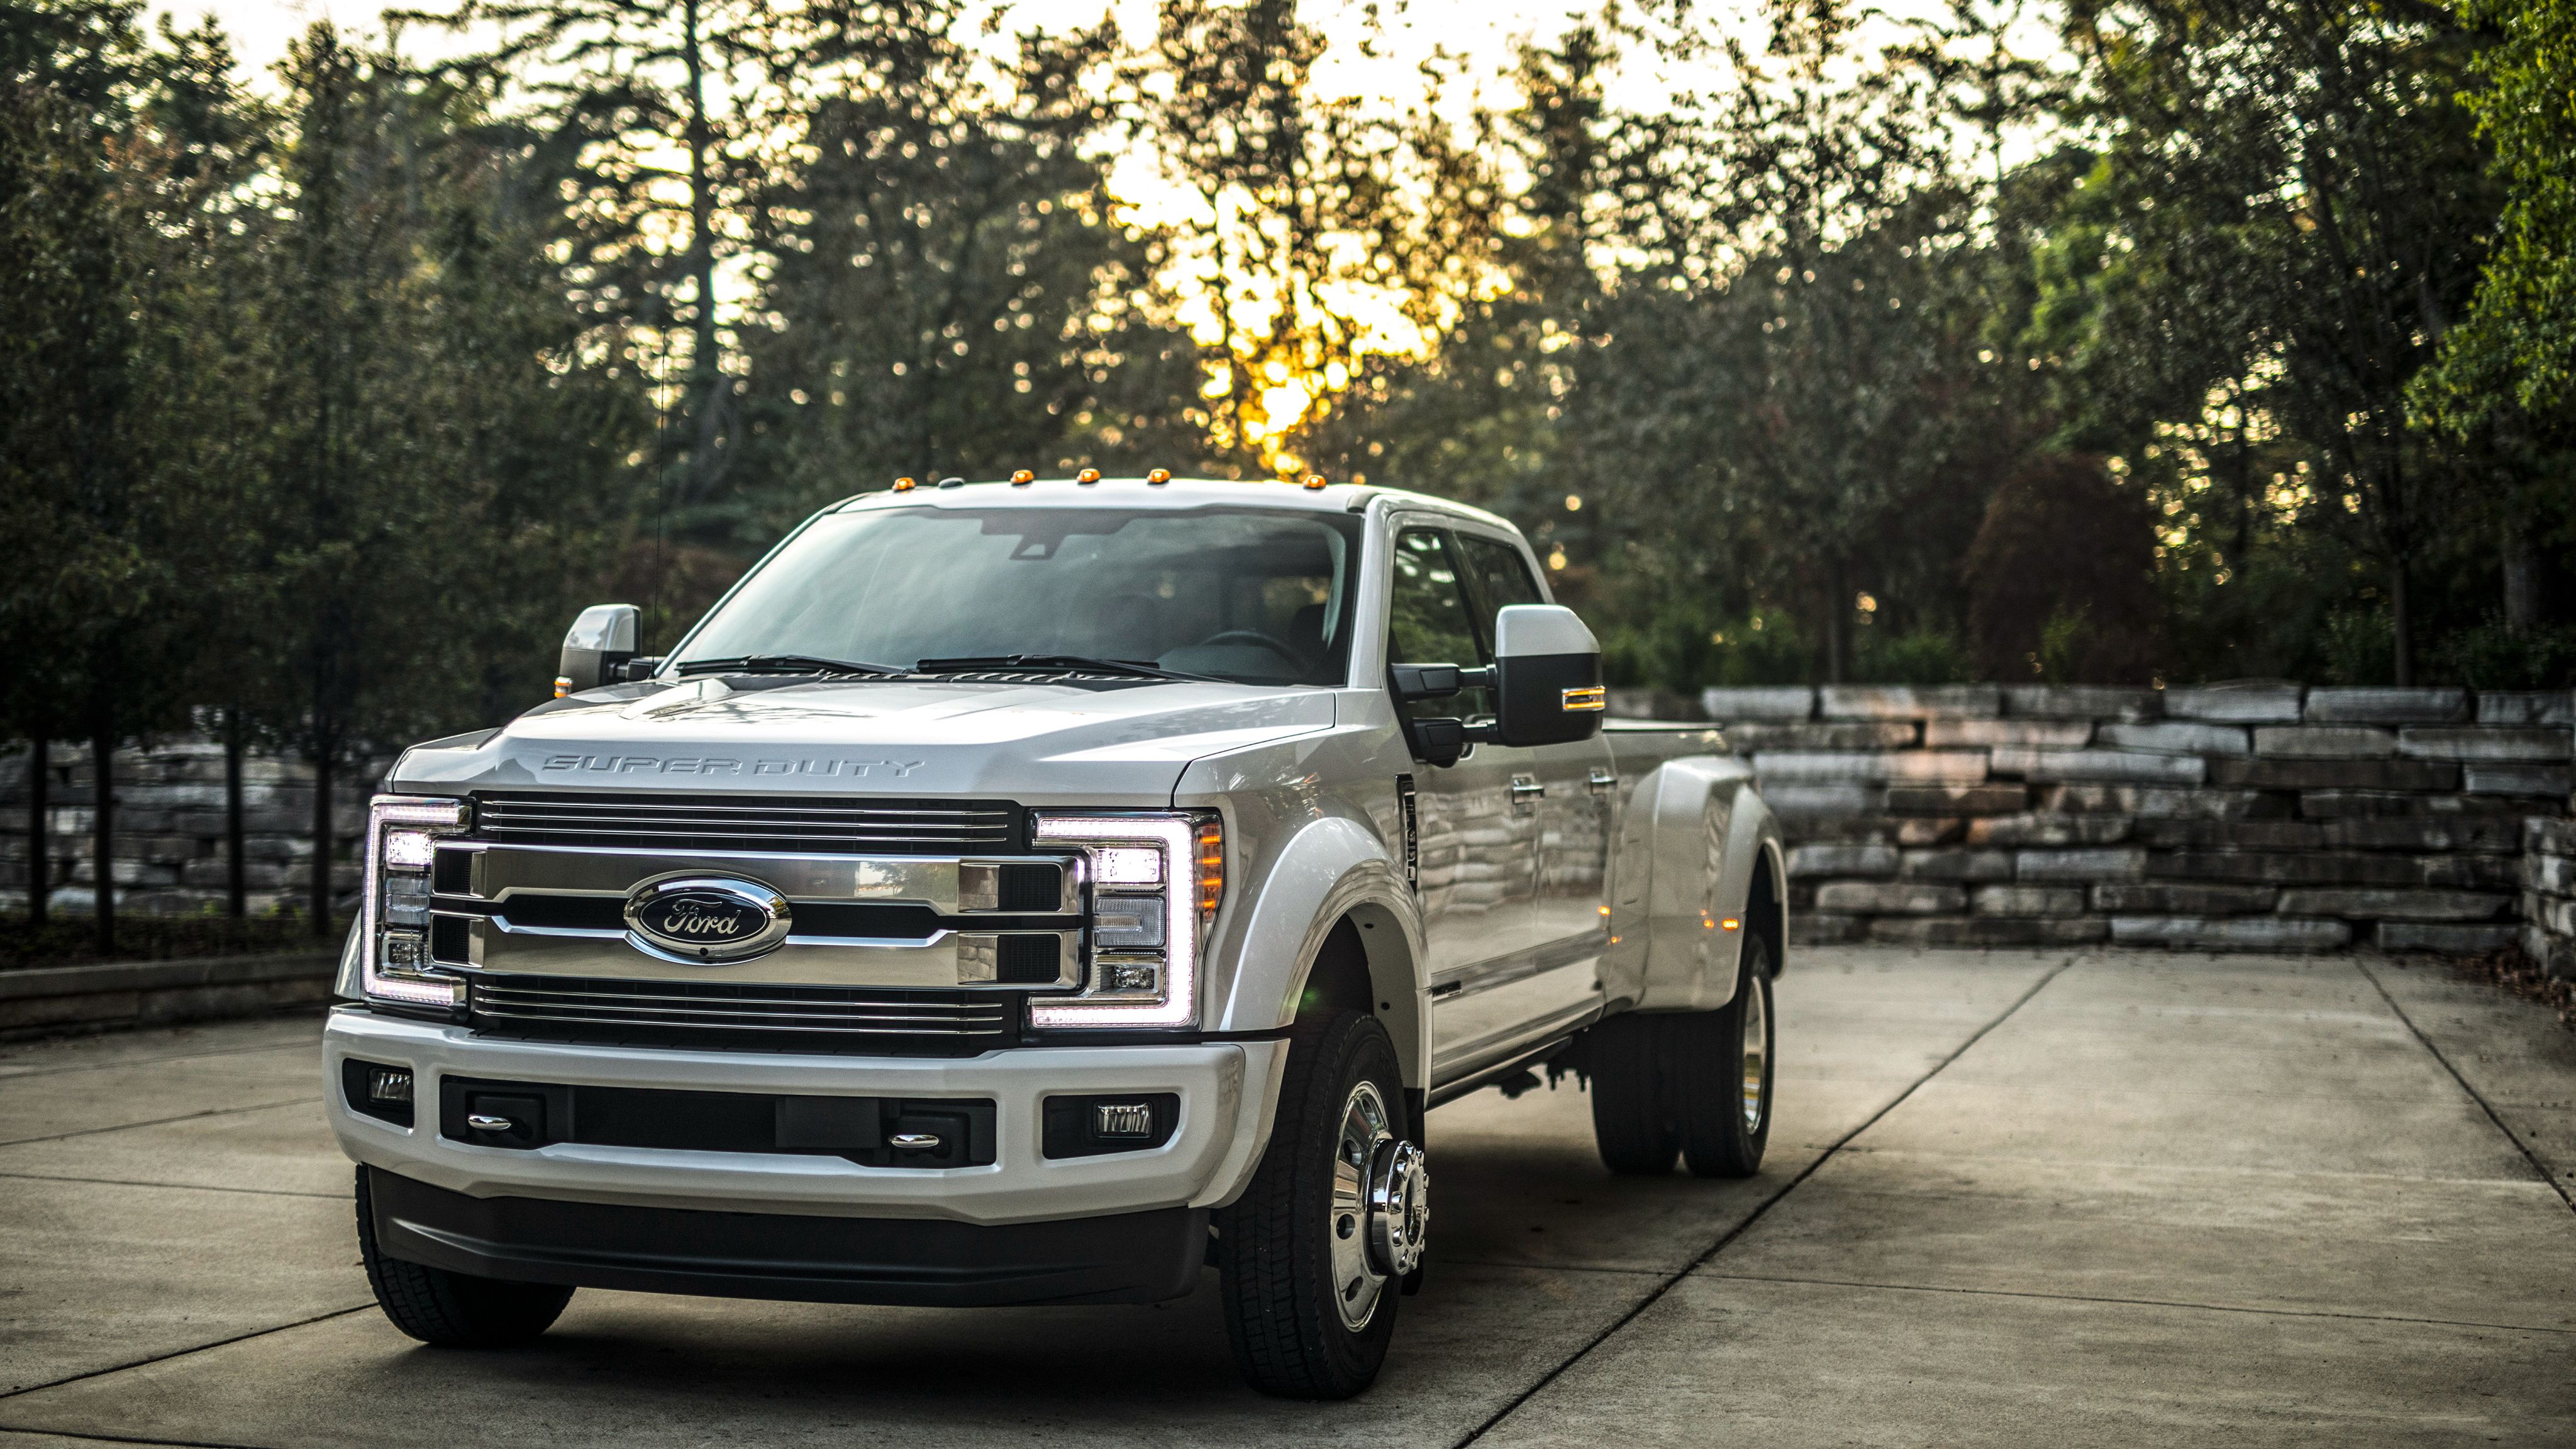 Download Wallpapers Ford F250 Super Duty Free For Android Wallpapers Ford F250 Super Duty Apk Download Steprimo Com